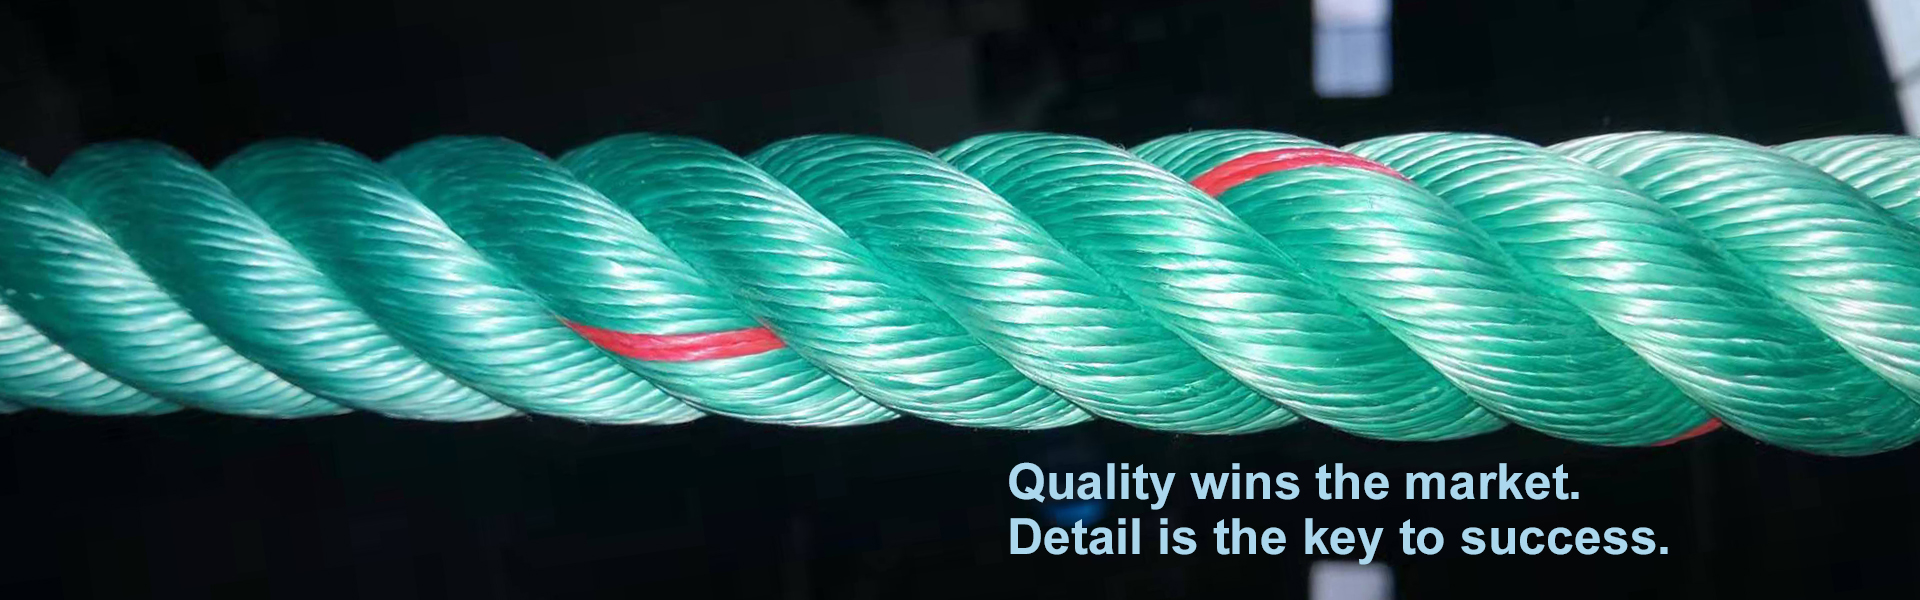 Pp Rope, Plastic Rope, Packaging Rope - Dongtalent